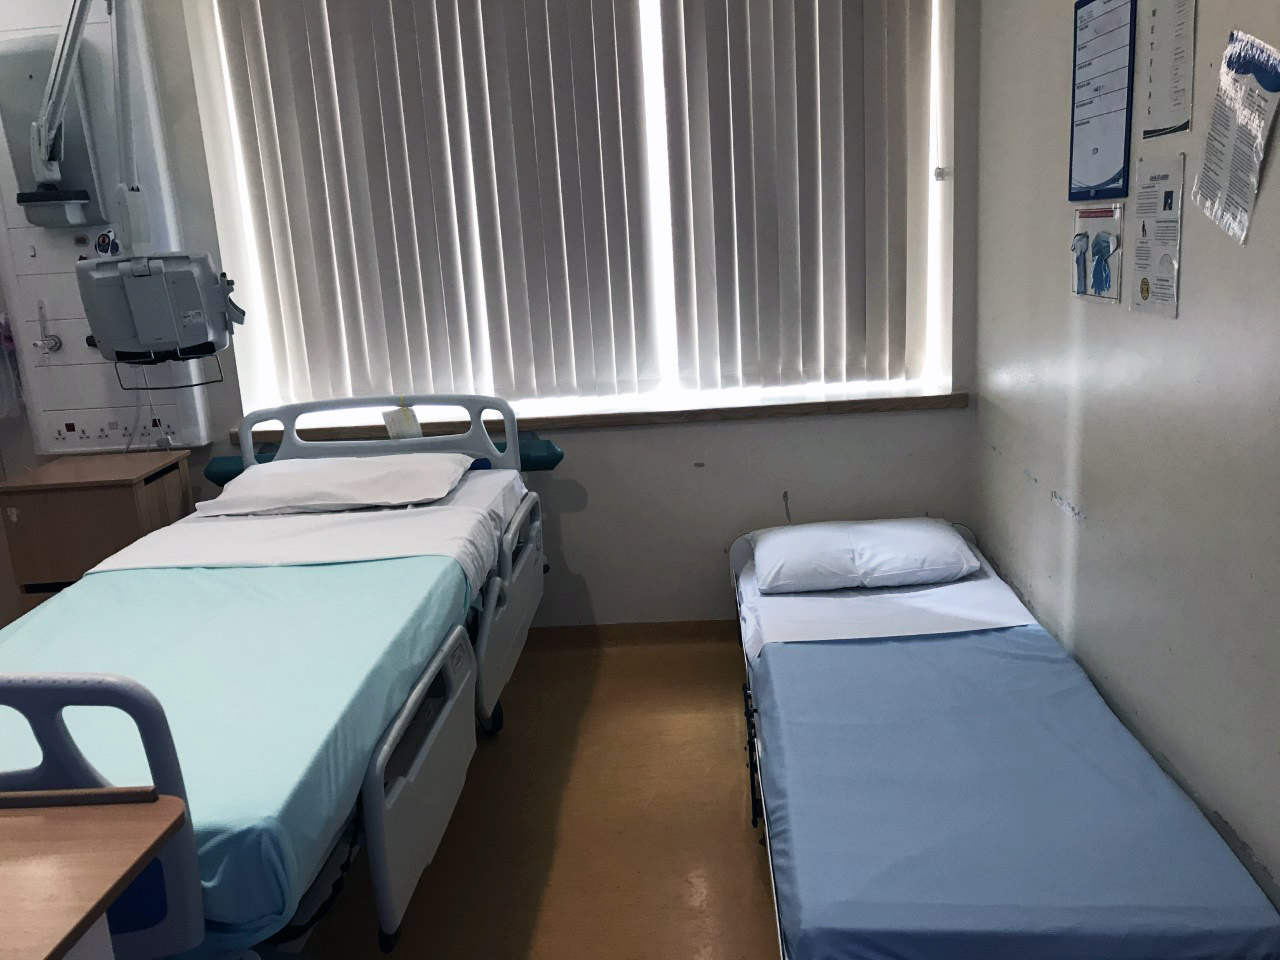 Beds for parents at NOrth Manchester General Hospital